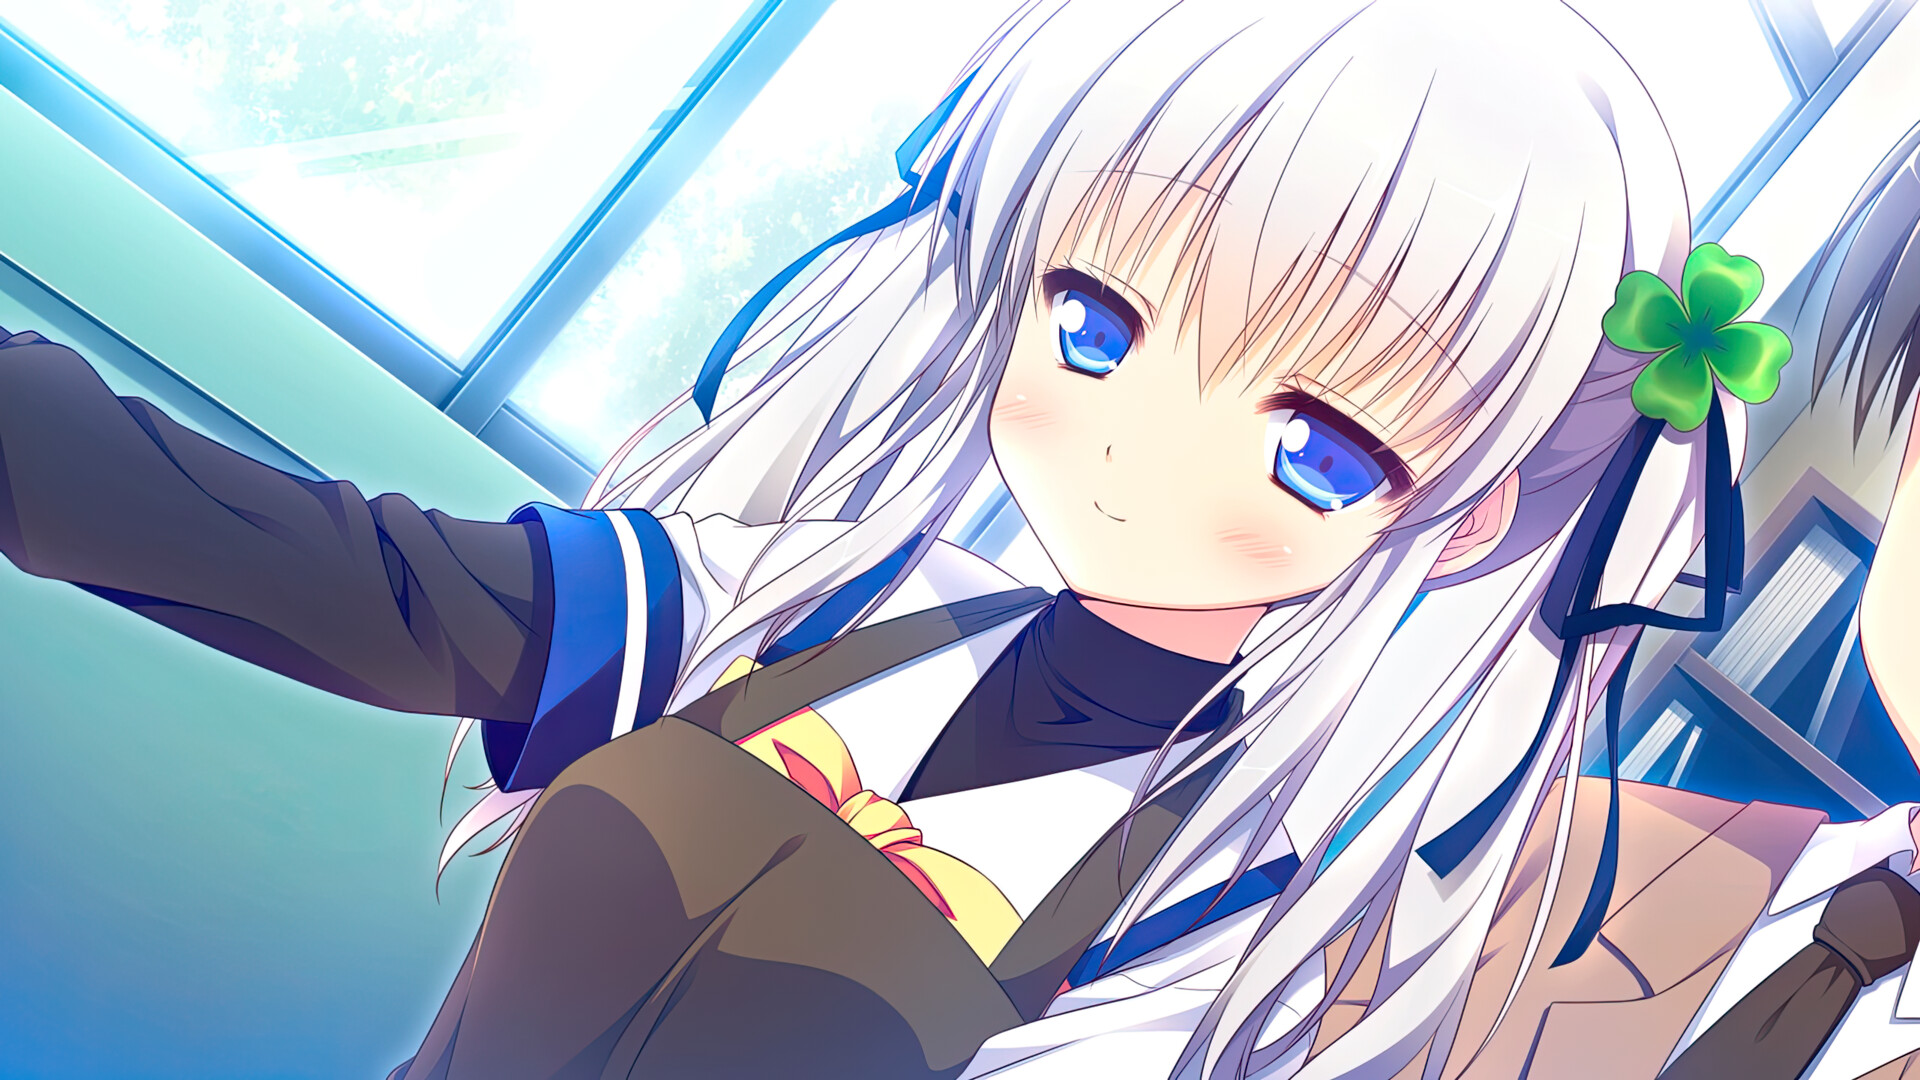 Save 20% on Clover Day's Plus on Steam